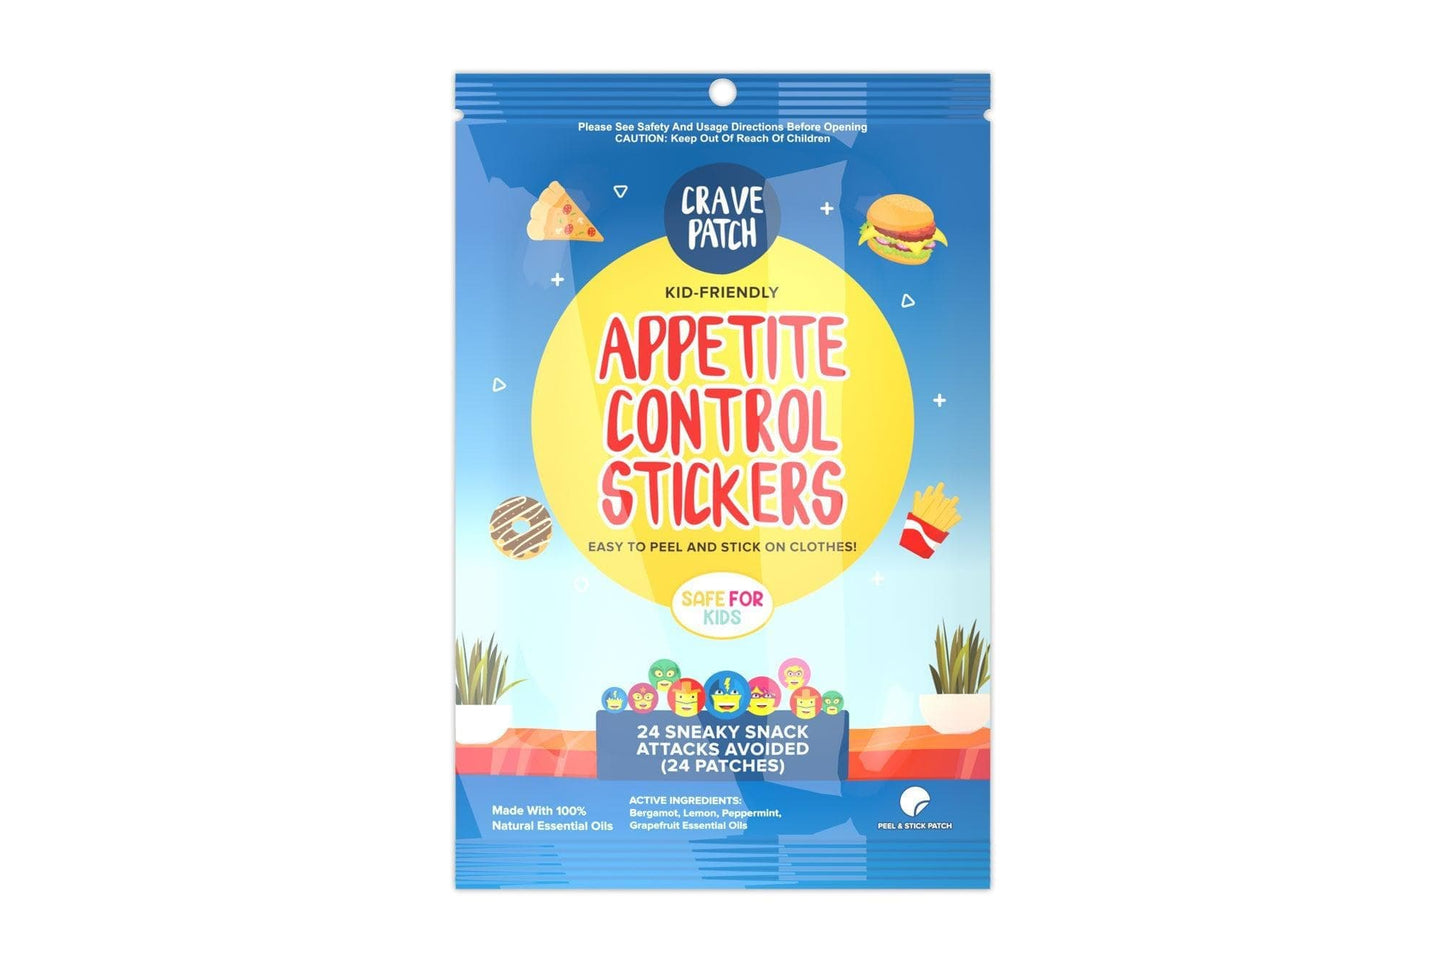 30 x CravePatch Appetite Control Stickers individual resale packets in a Retail Display Box - AU